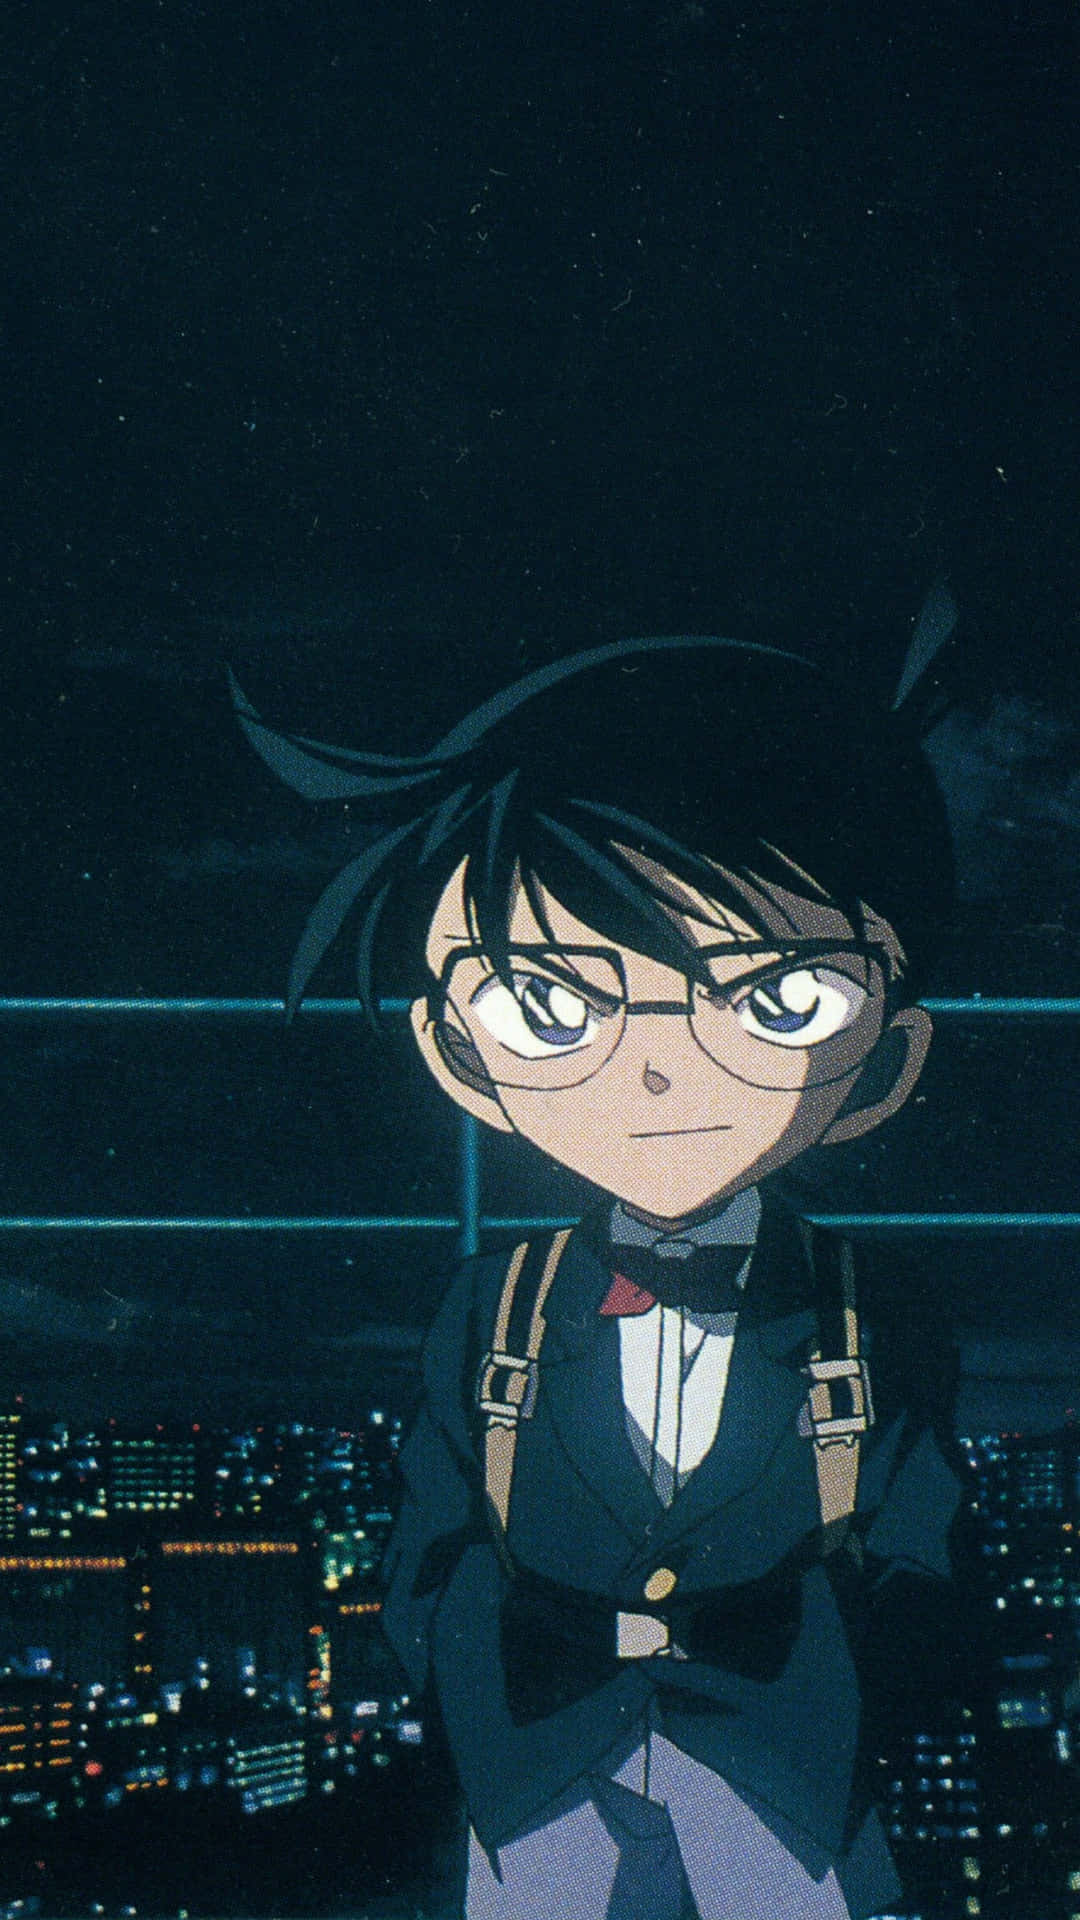 Follow the clues and get to the bottom of the case with Detective Conan